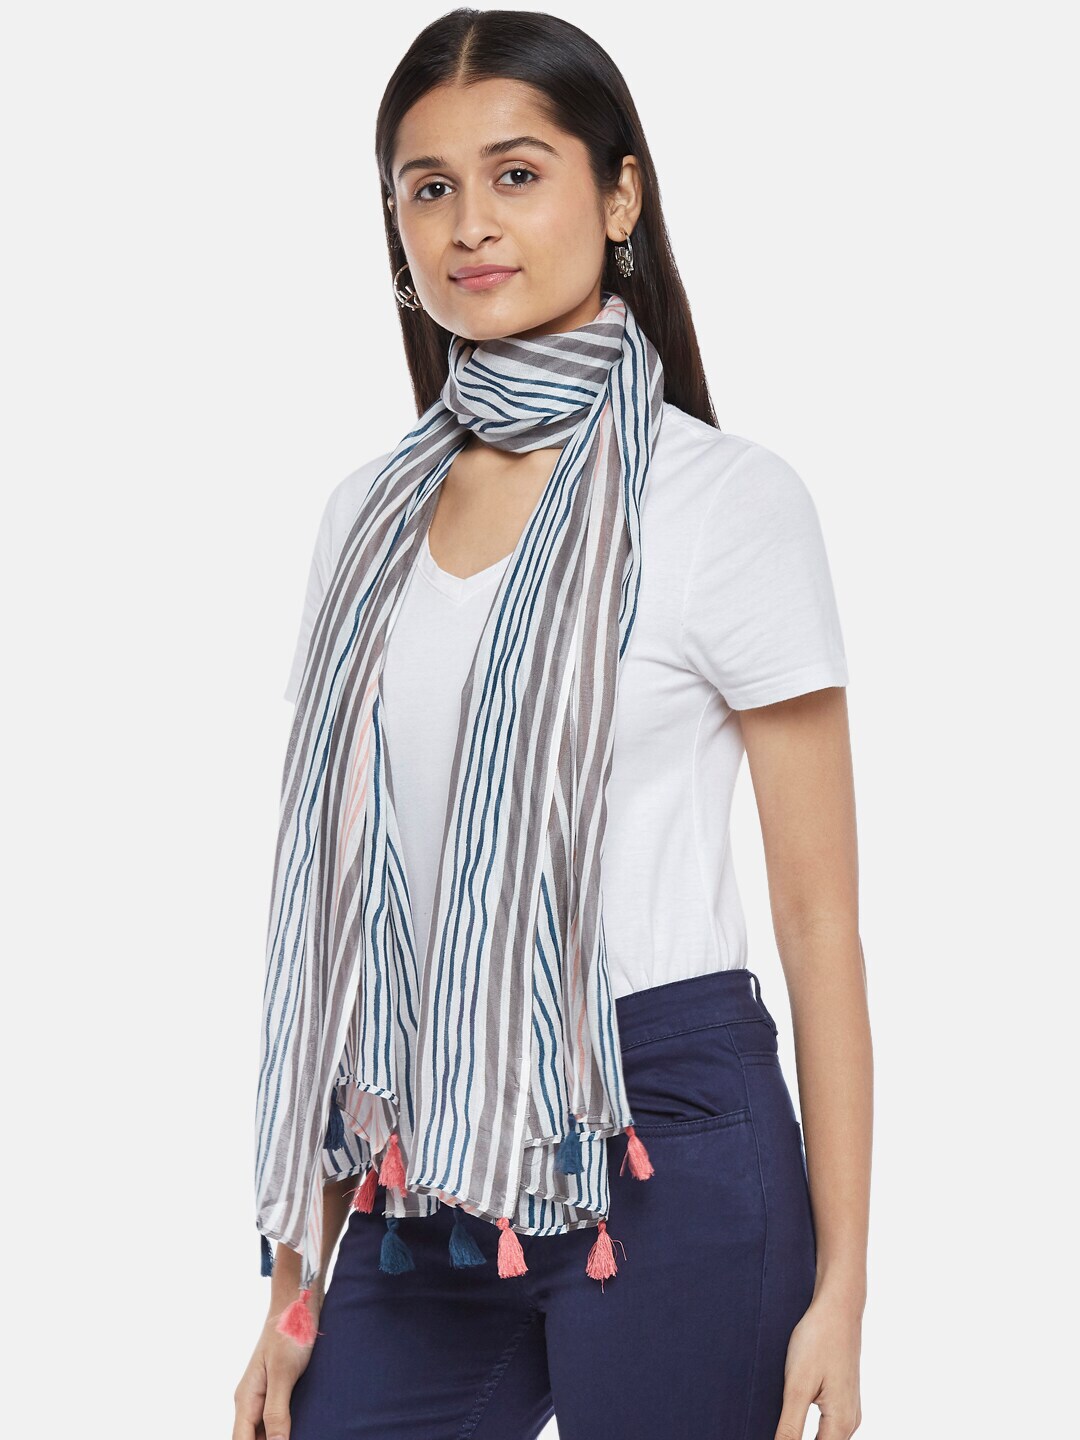 Honey by Pantaloons Women White & Blue Striped Scarf Price in India